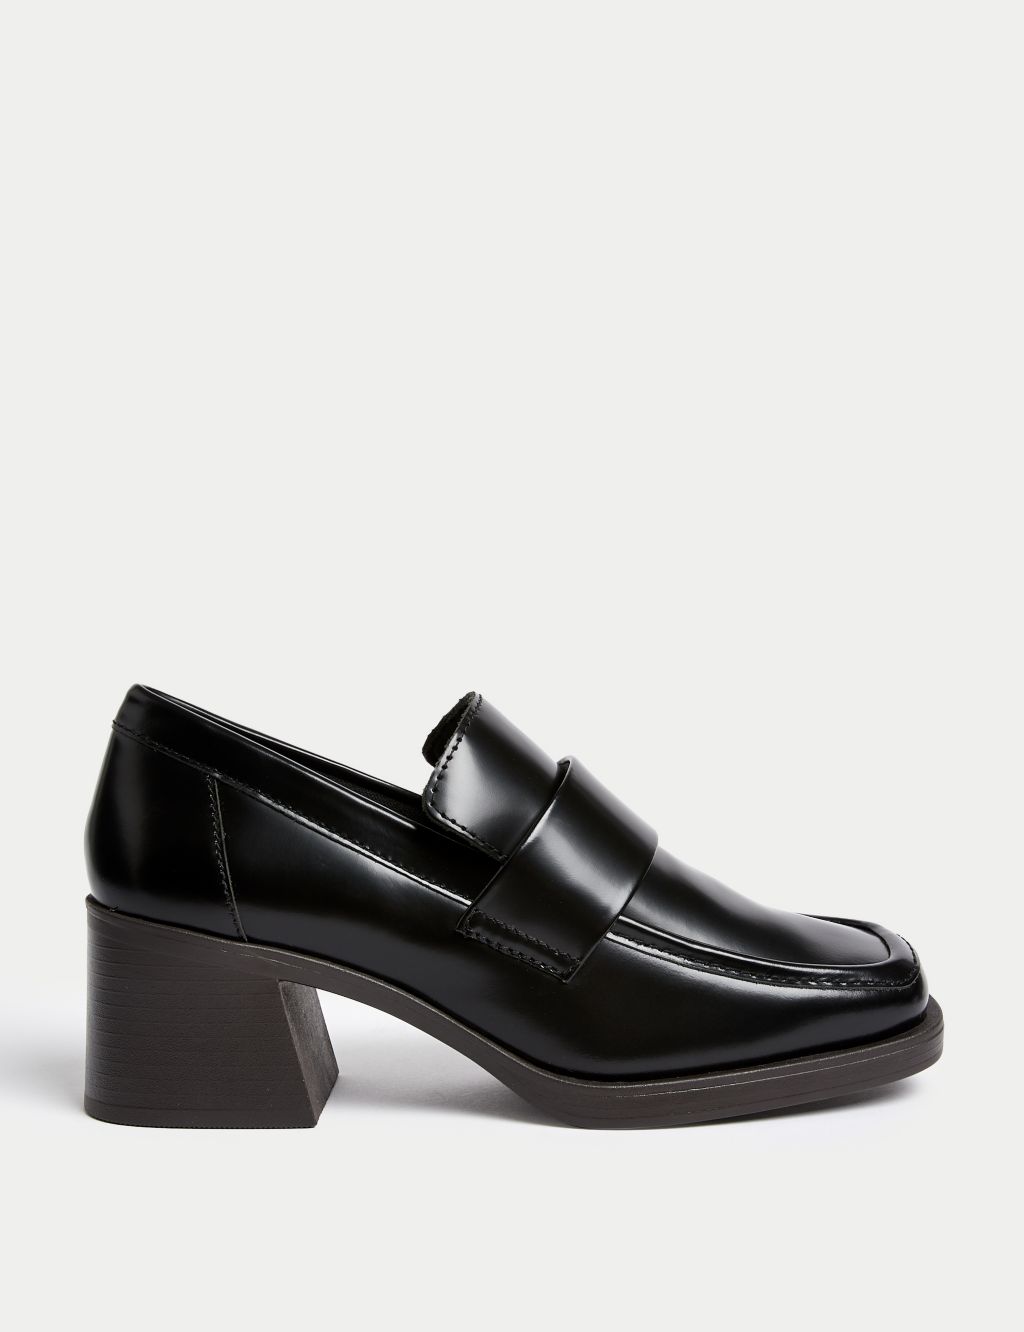 Leather Block Heel Square Toe Loafers image 1